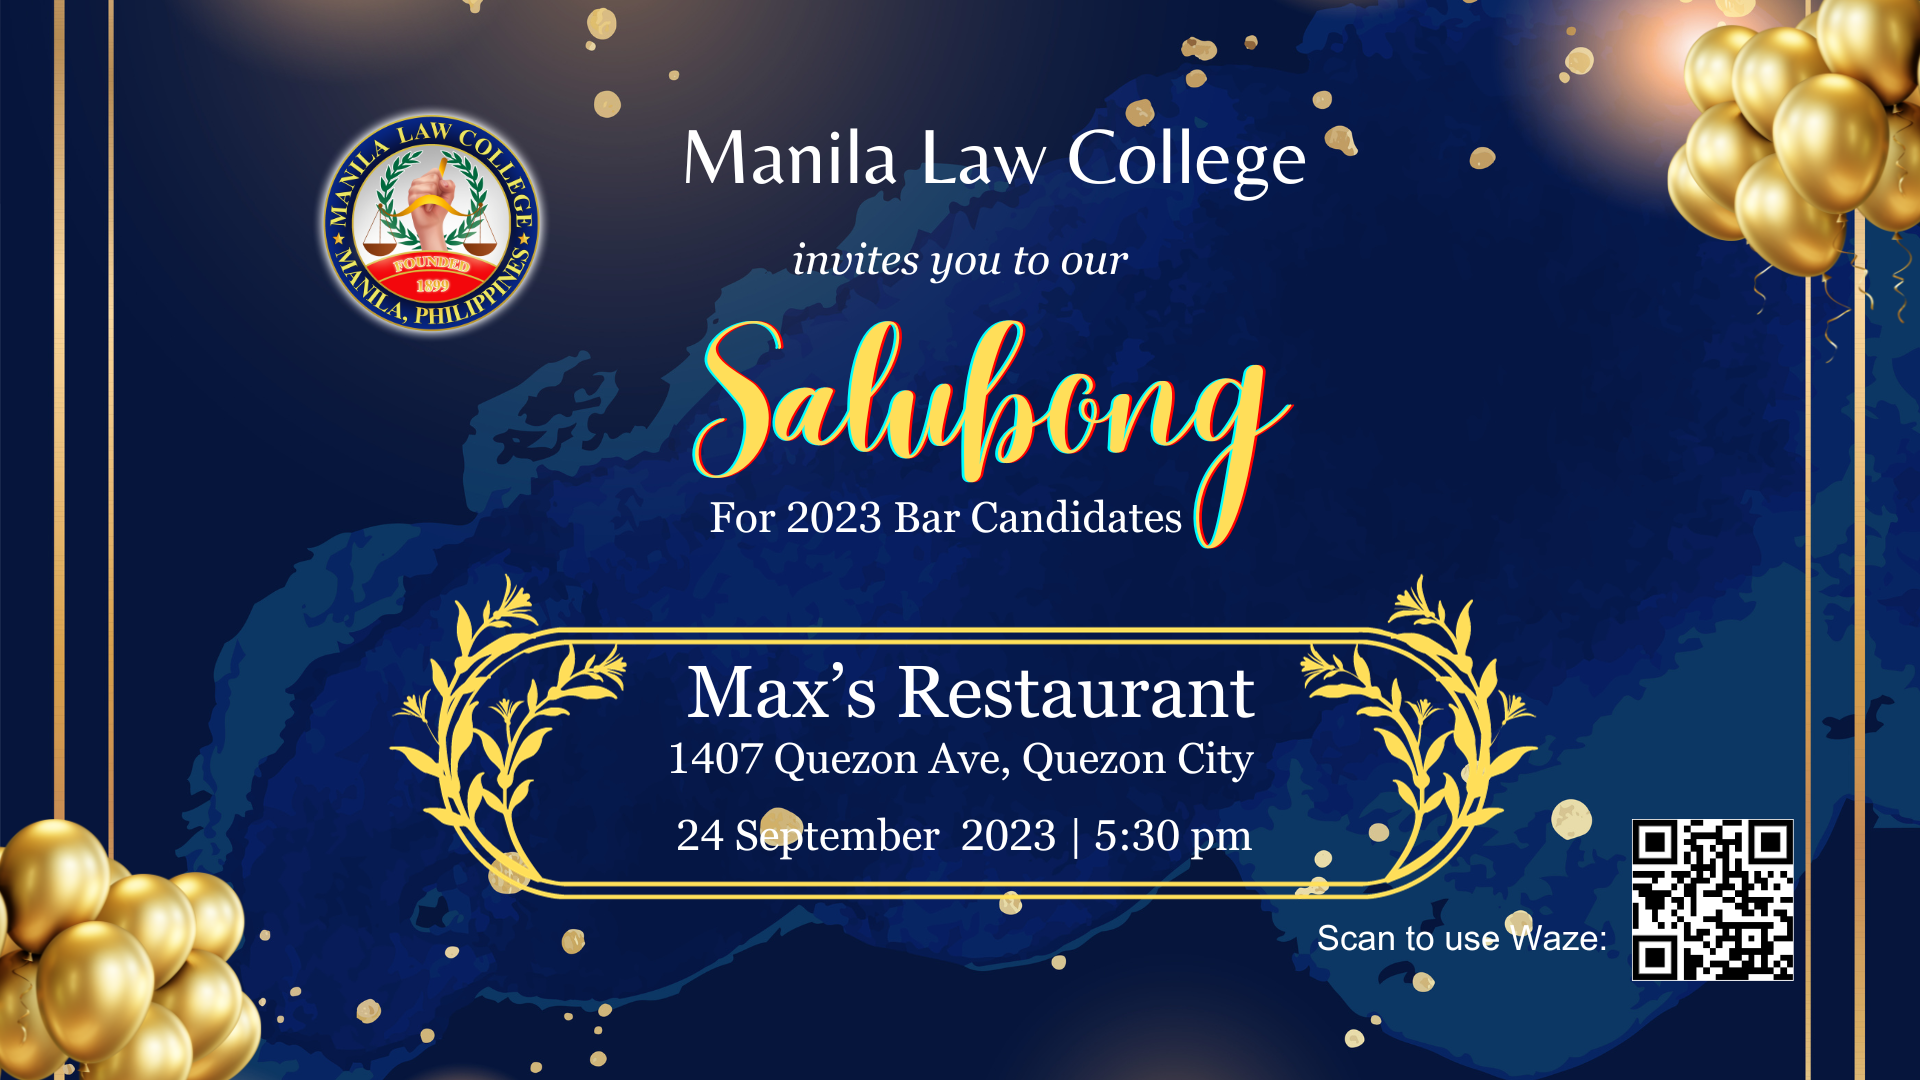 MLC conducts its yearly ‘Salubong’ for 2023 Bar Candidates